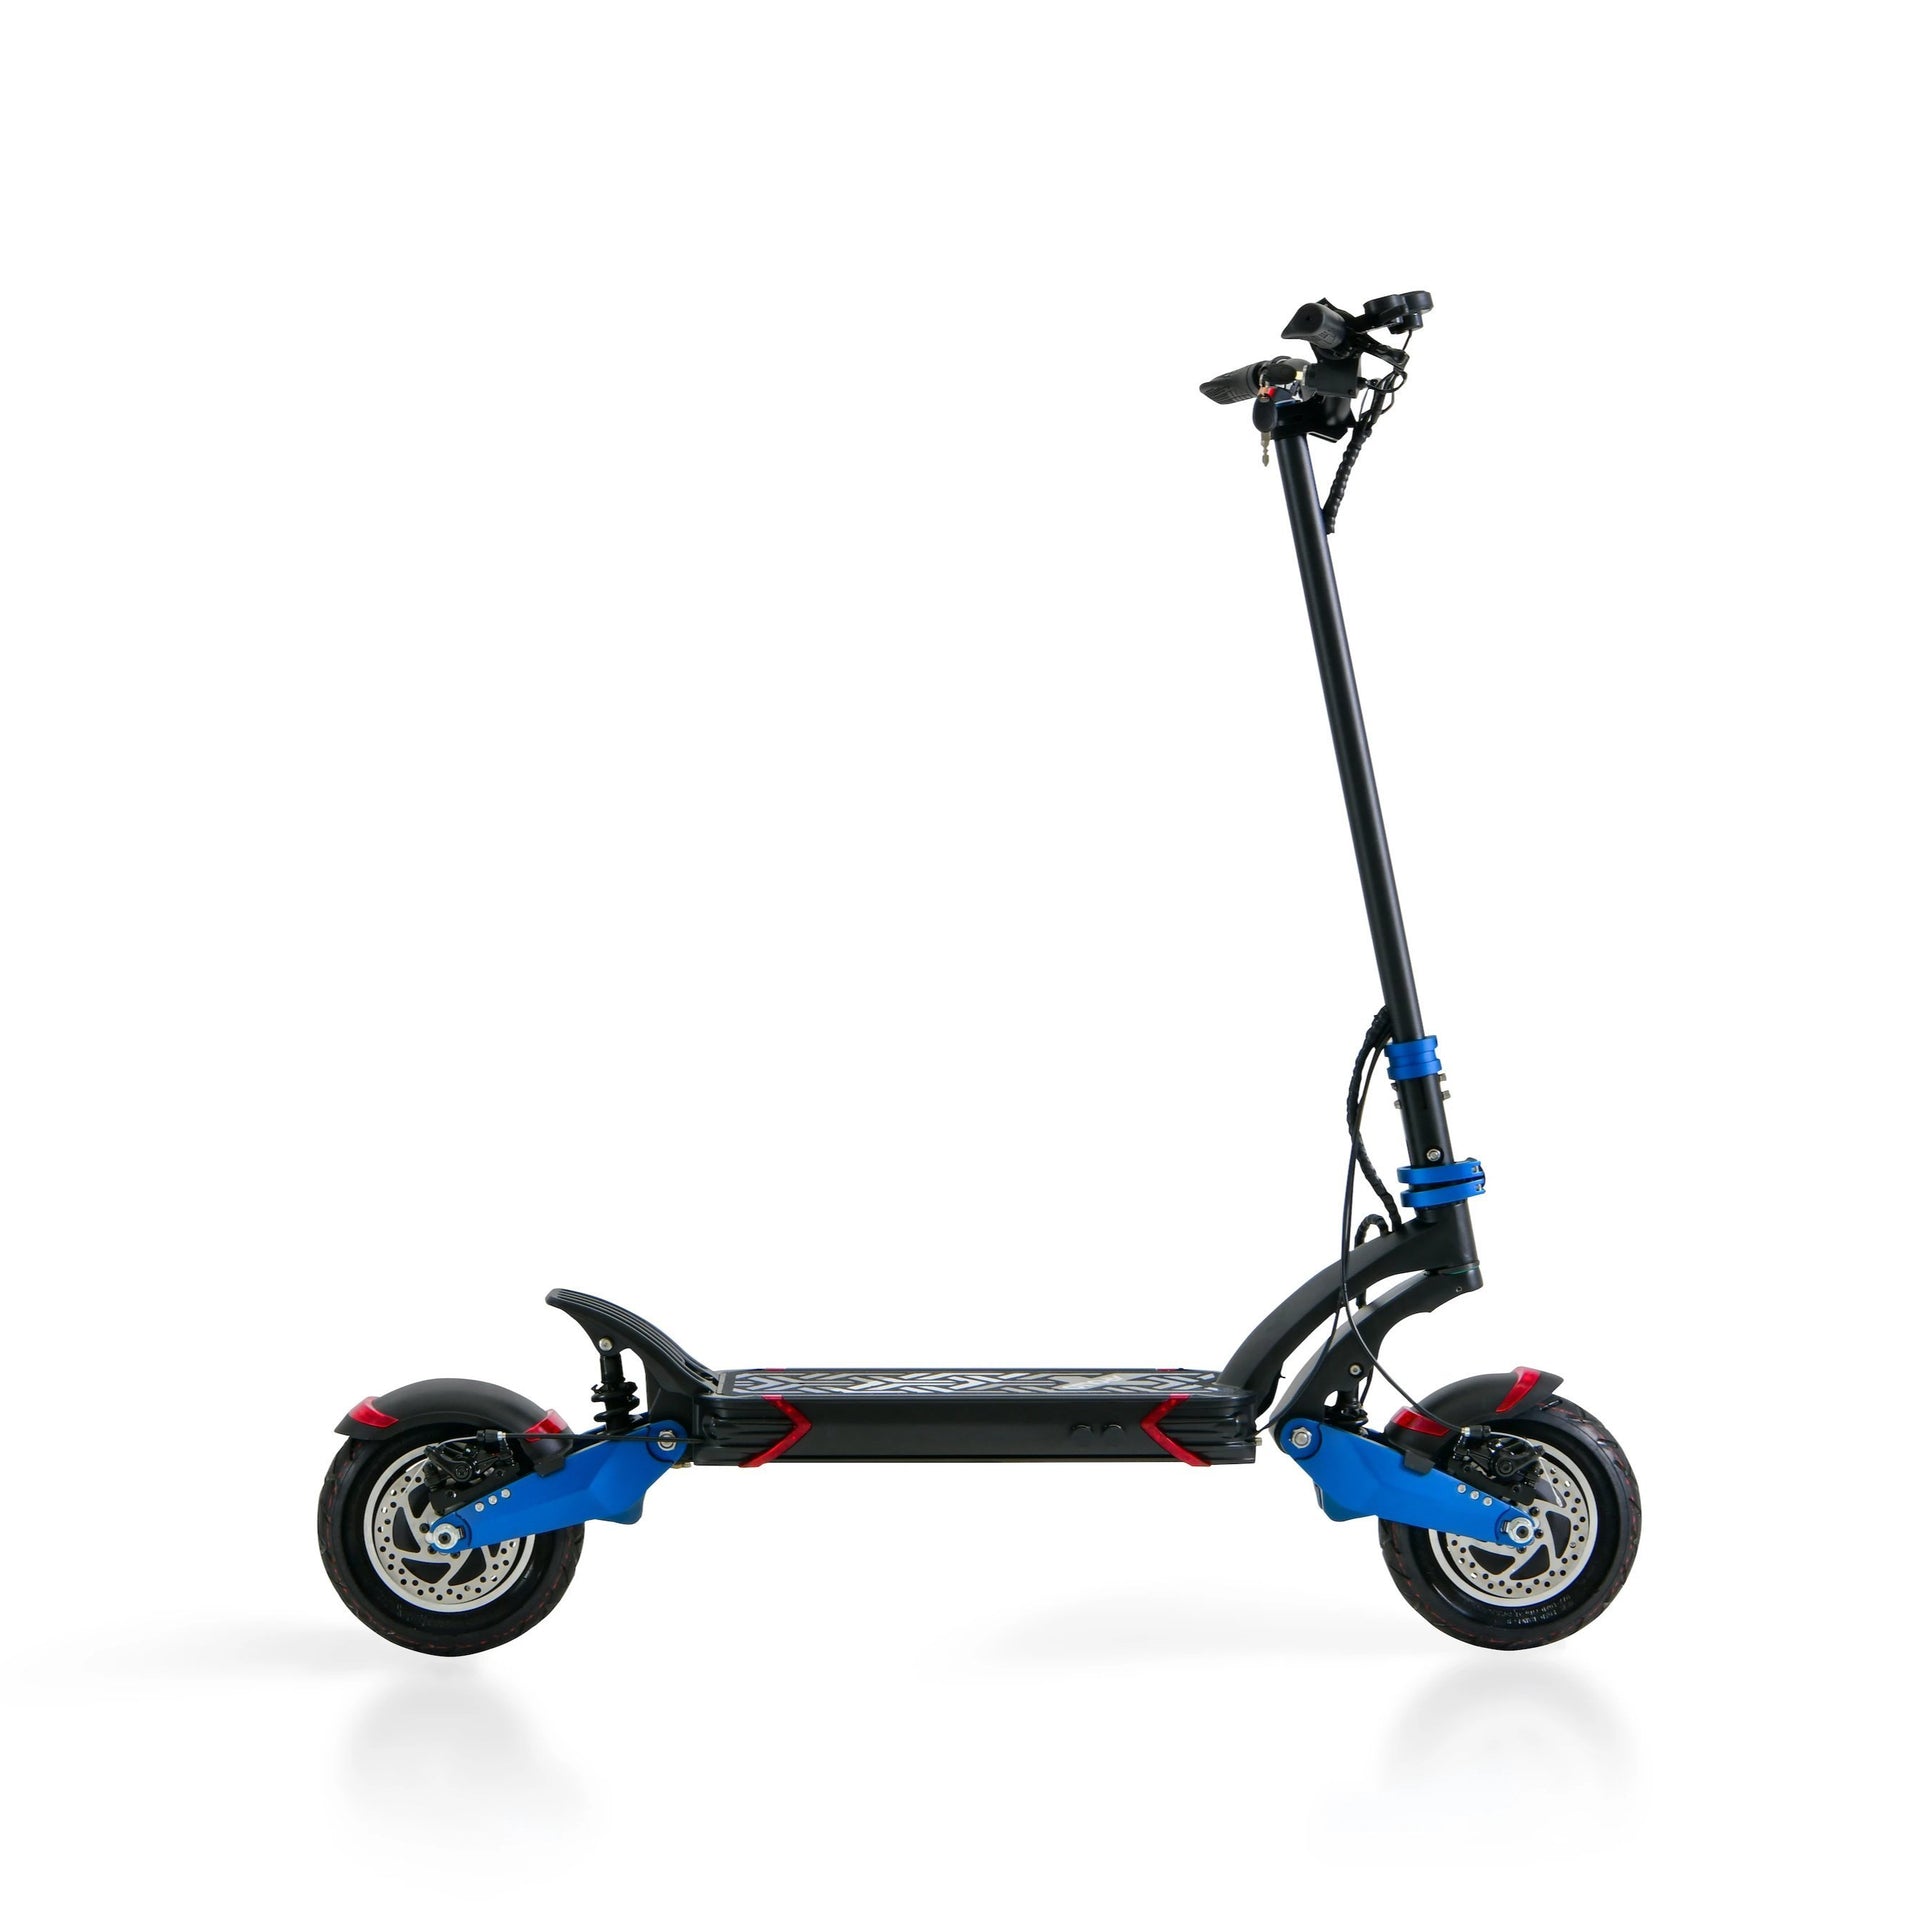 Apollo Pro The Most Powerful Electric Scooter